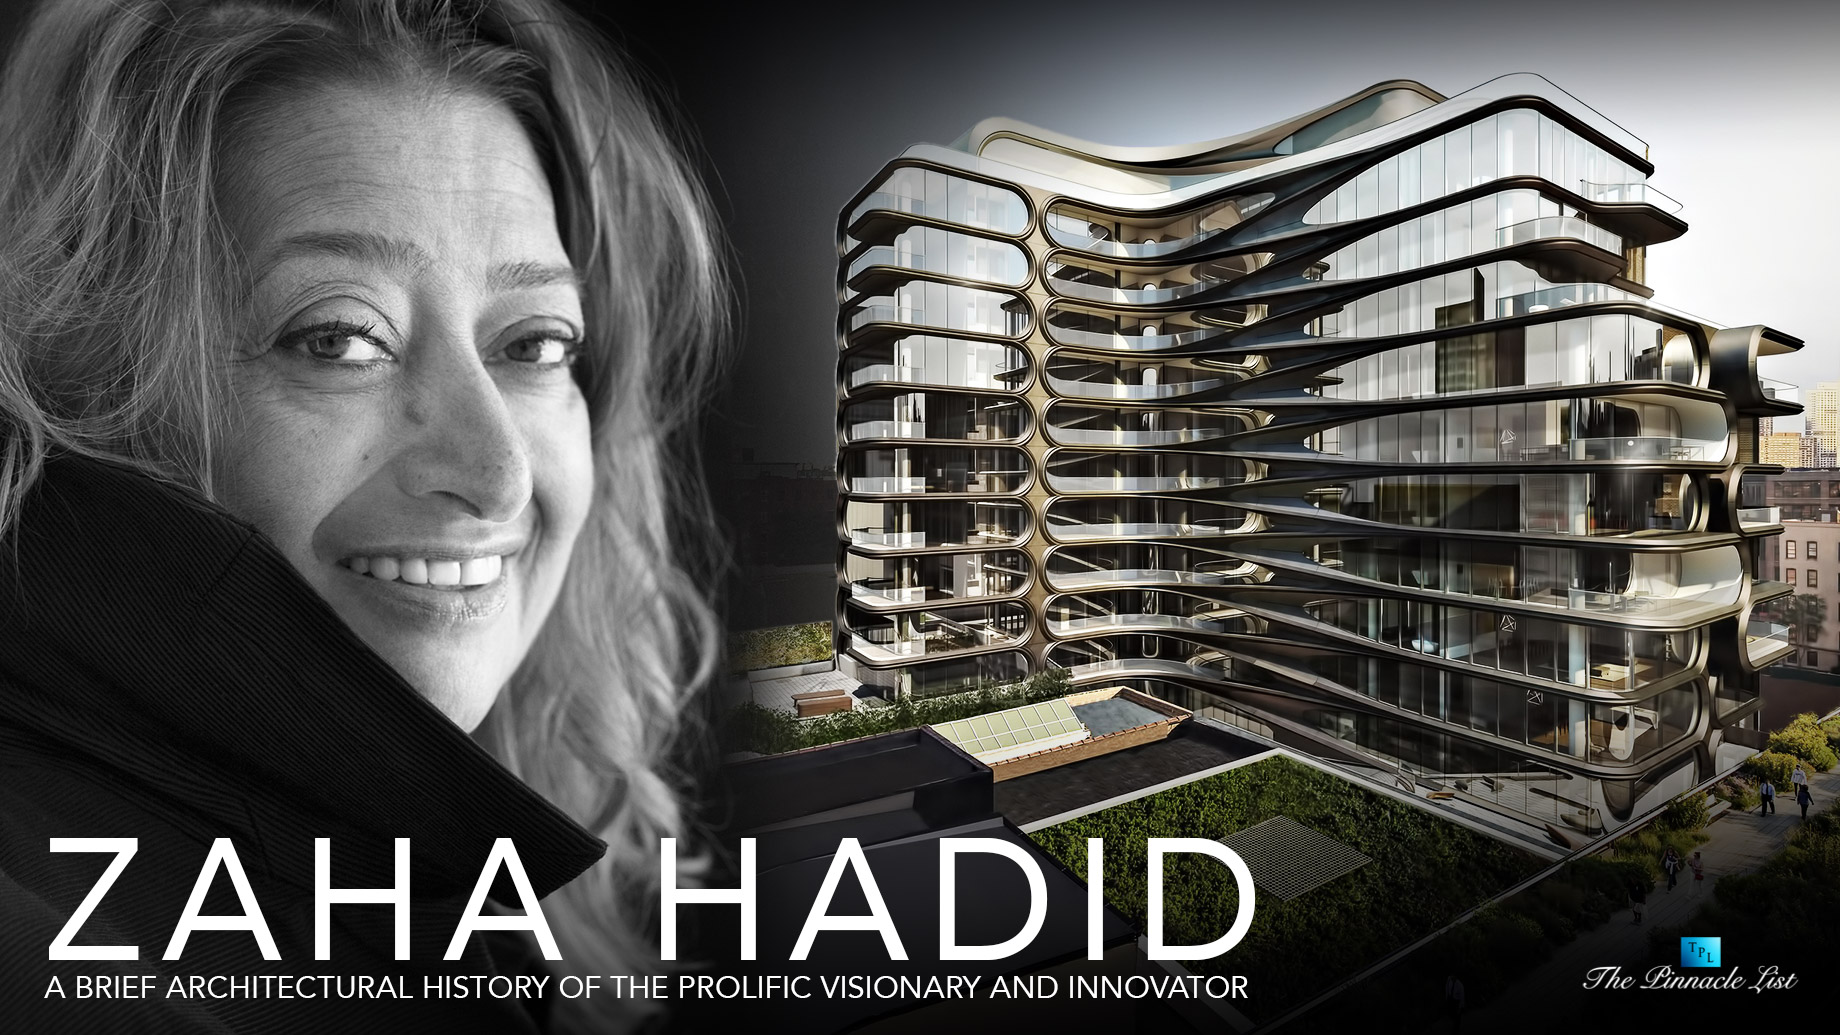 Zaha Hadid – A Brief Architectural History of the Prolific Visionary and Innovator